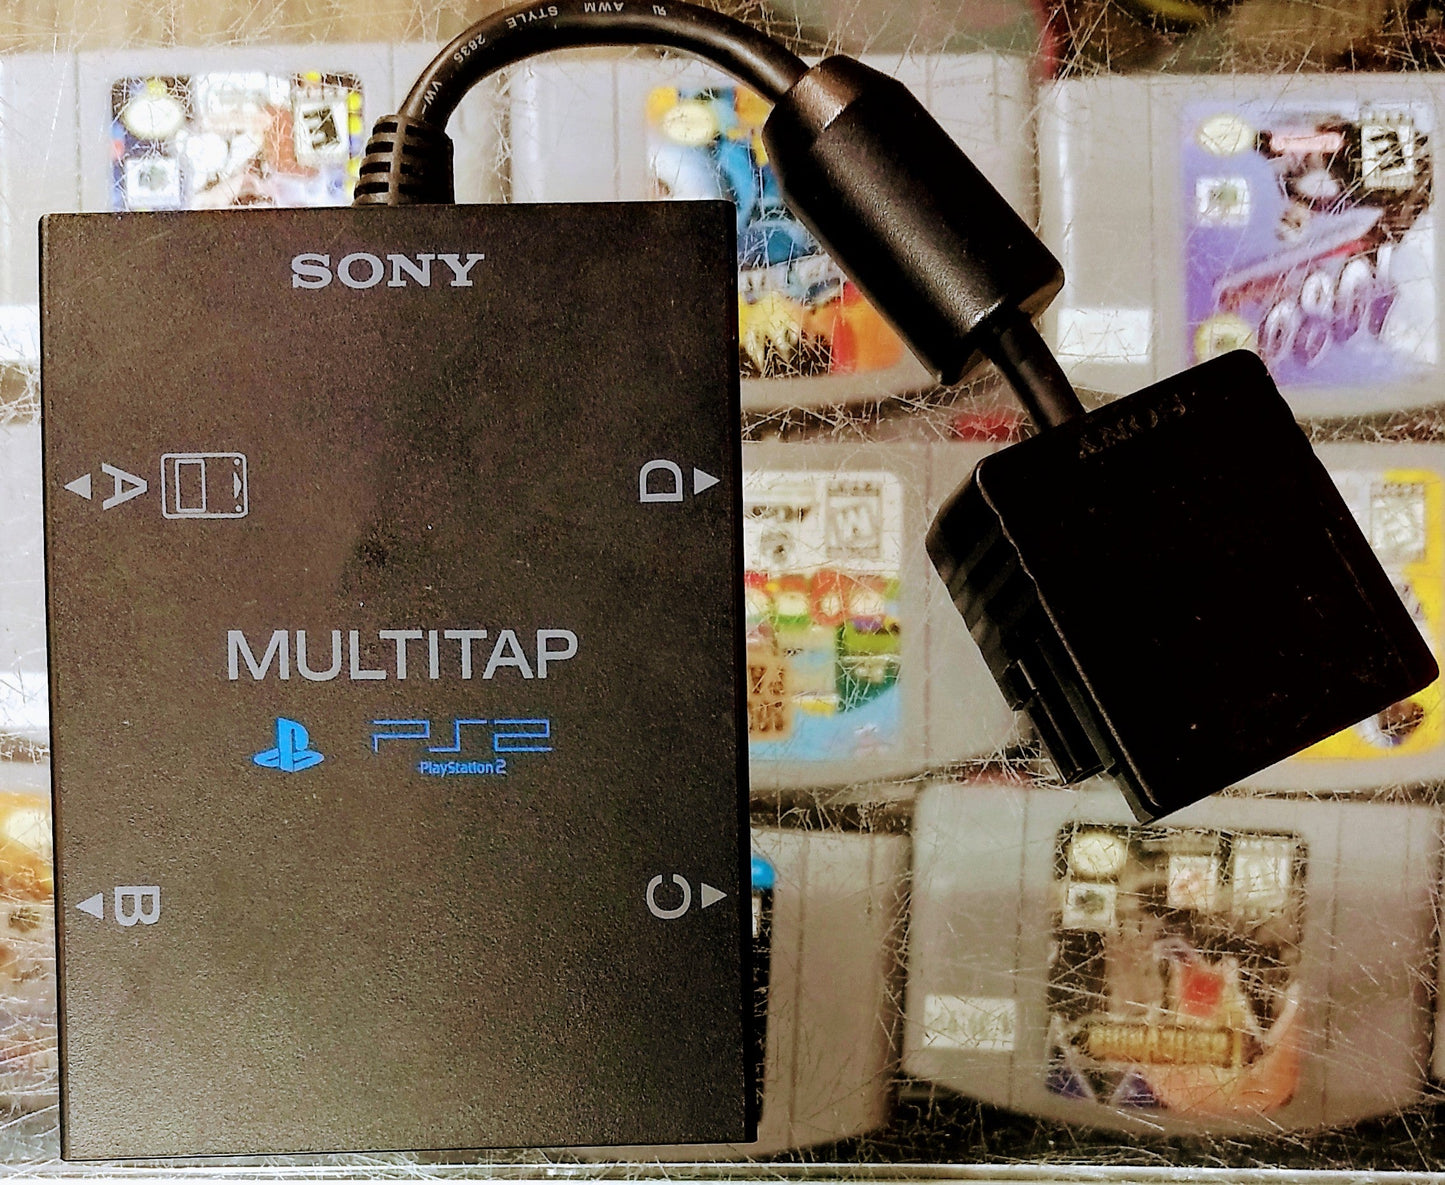 MULTITAP PLAYSTATION 2 PS2 - jeux video game-x